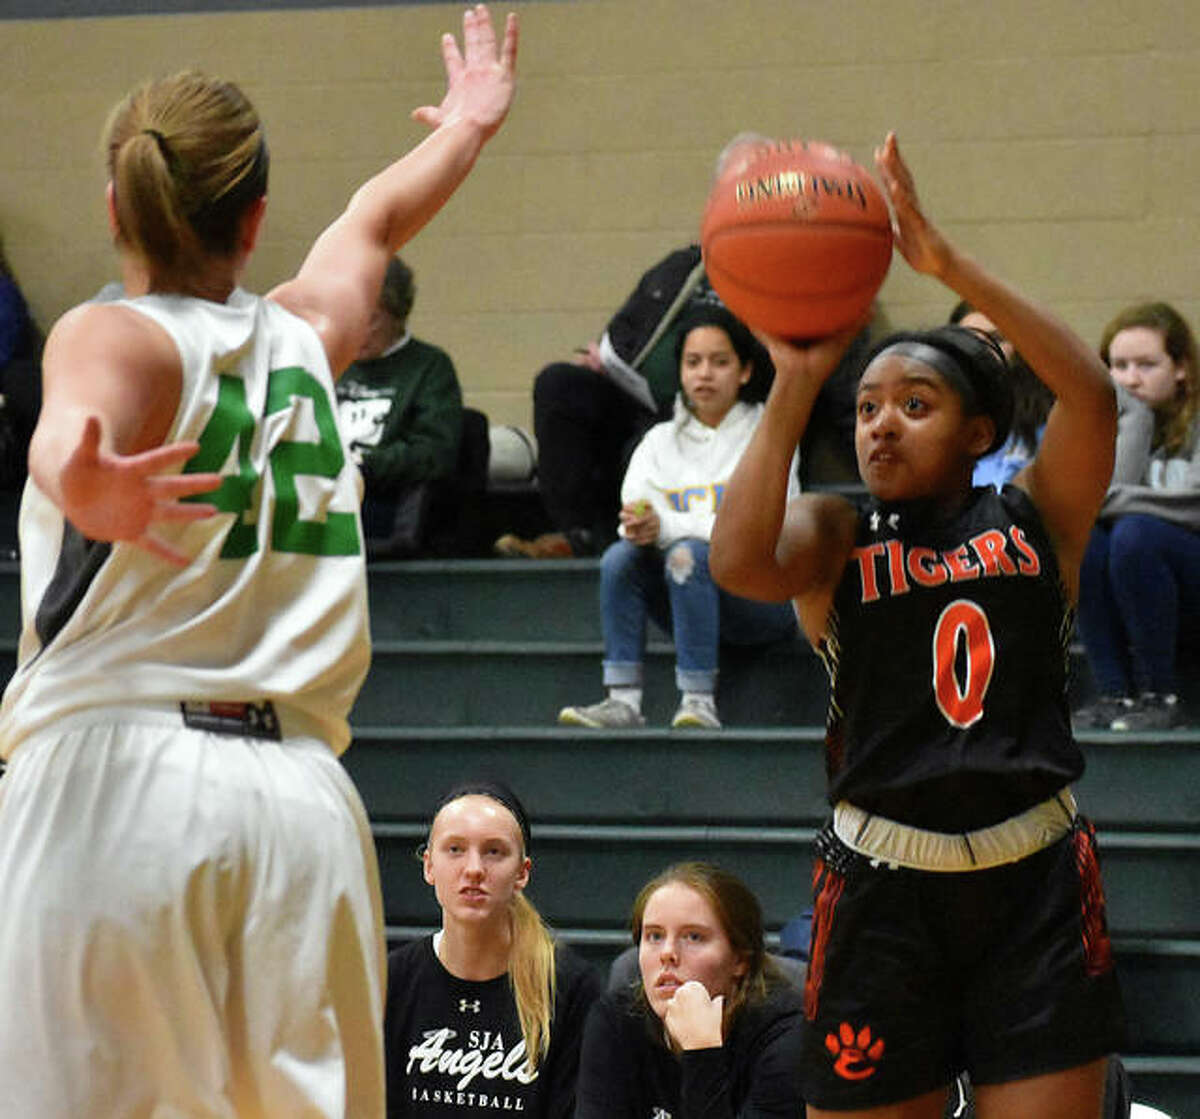 Edwardsville senior guard Quierra Love puts up a 3-pointer in the second quarter against St. Joseph’s on Wednesday in St. Louis.